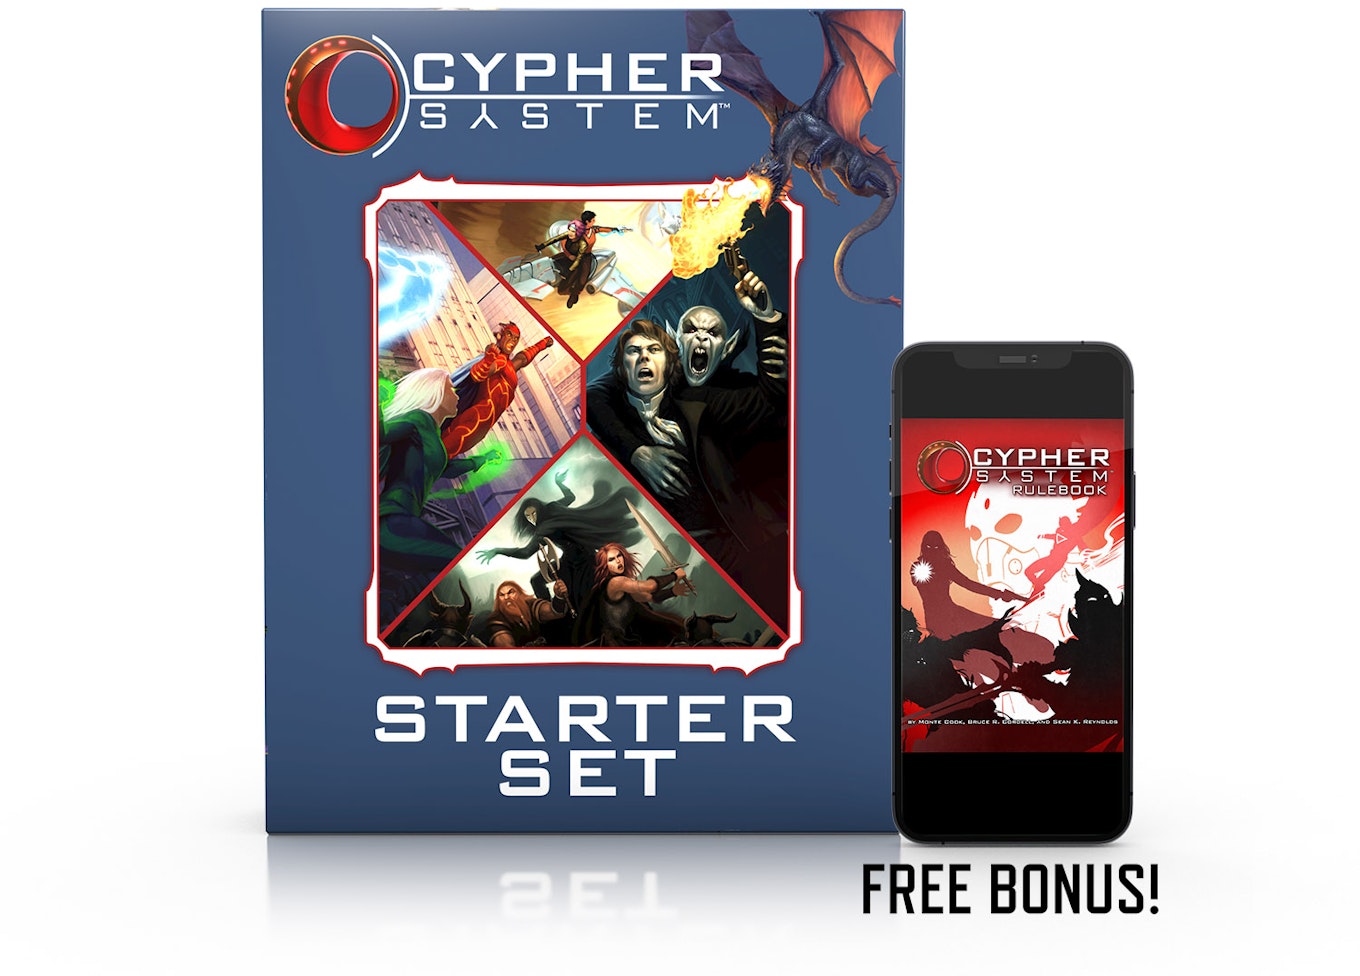 Image of the Cypher System Starter Set and the Cypher System Rulebook as a free bonus PDF